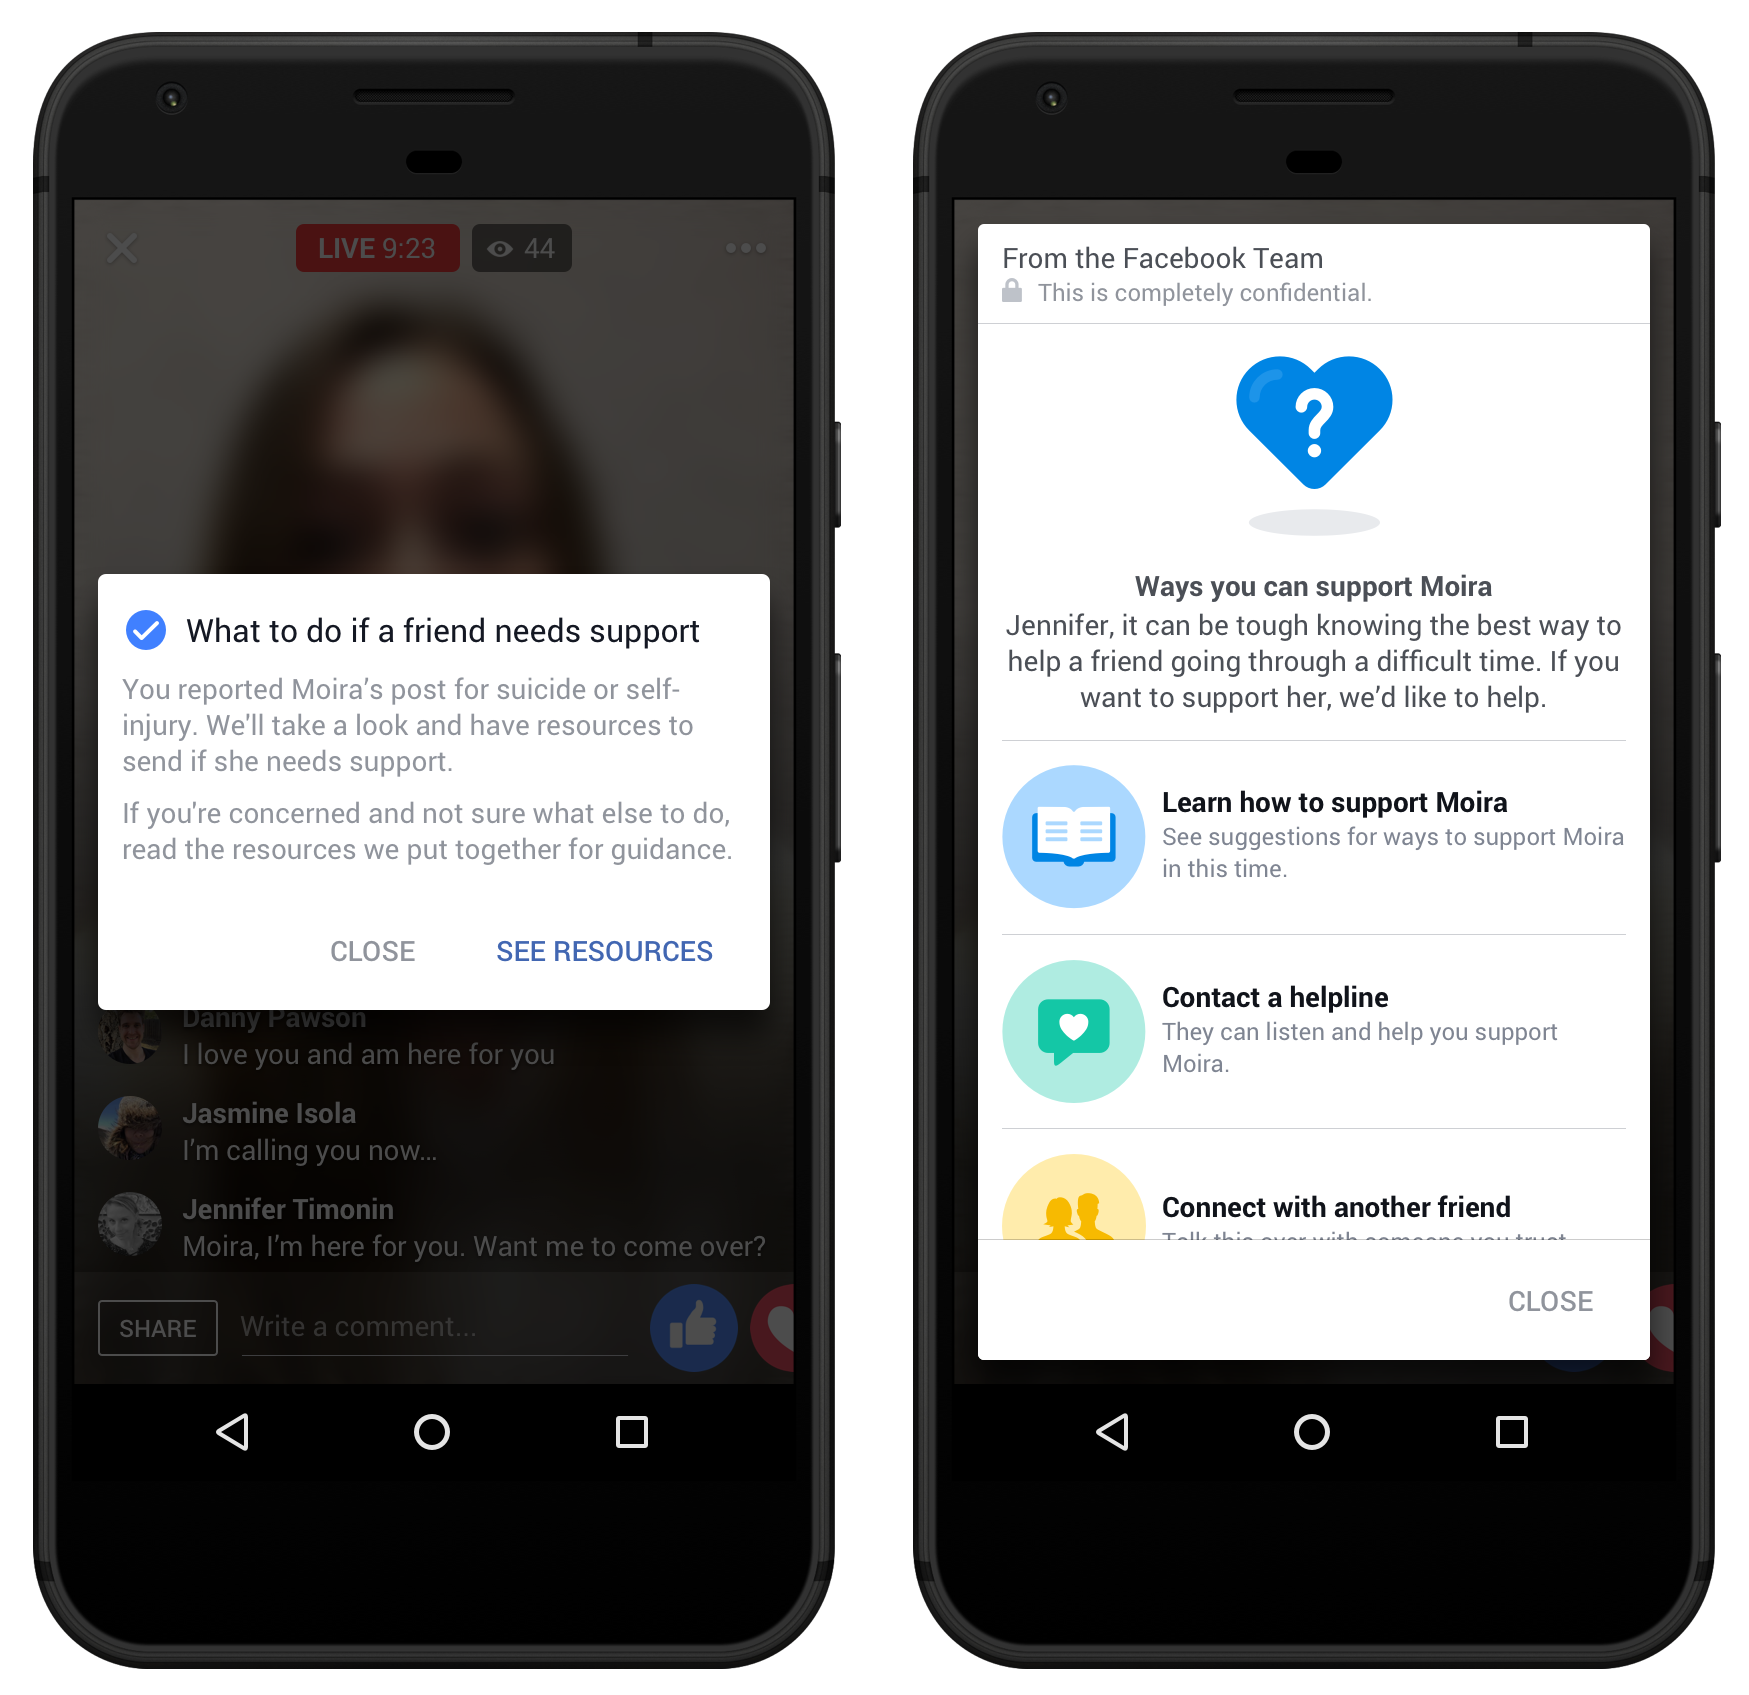 Facebook rolls out AI to detect suicidal posts before they’re reported